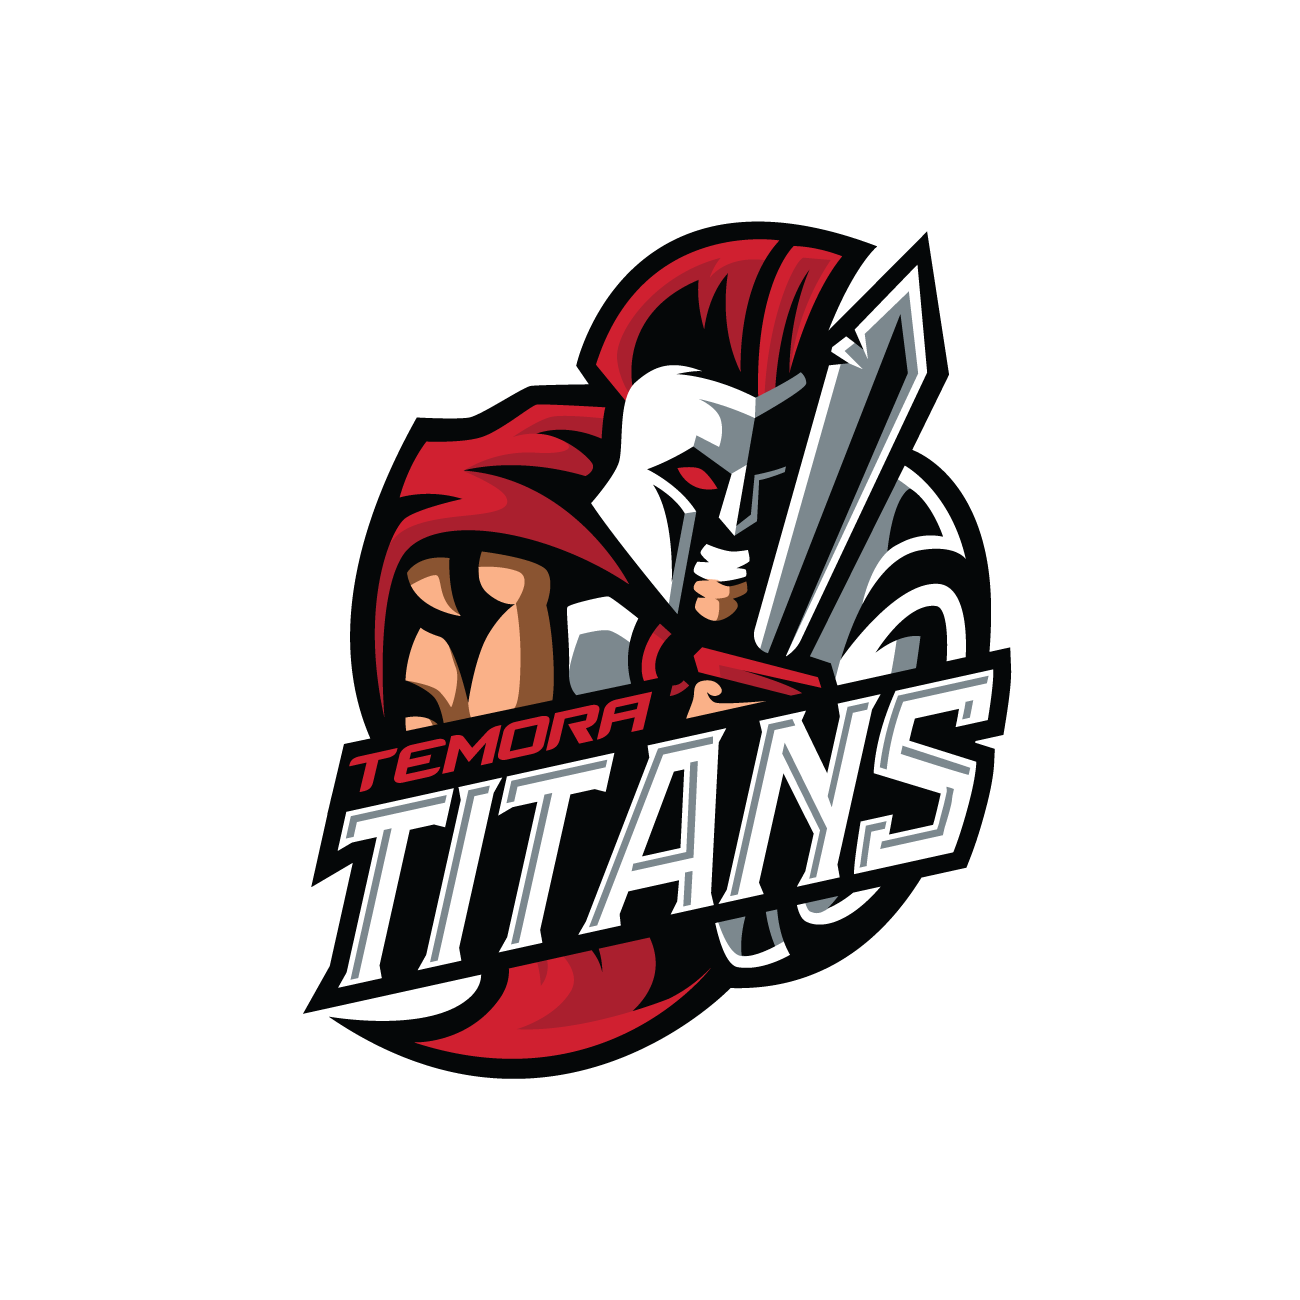 TITANS-TOUCH-LOGO.png__PID:83fa1082-6879-4a07-a022-aa38ab4a0ed2